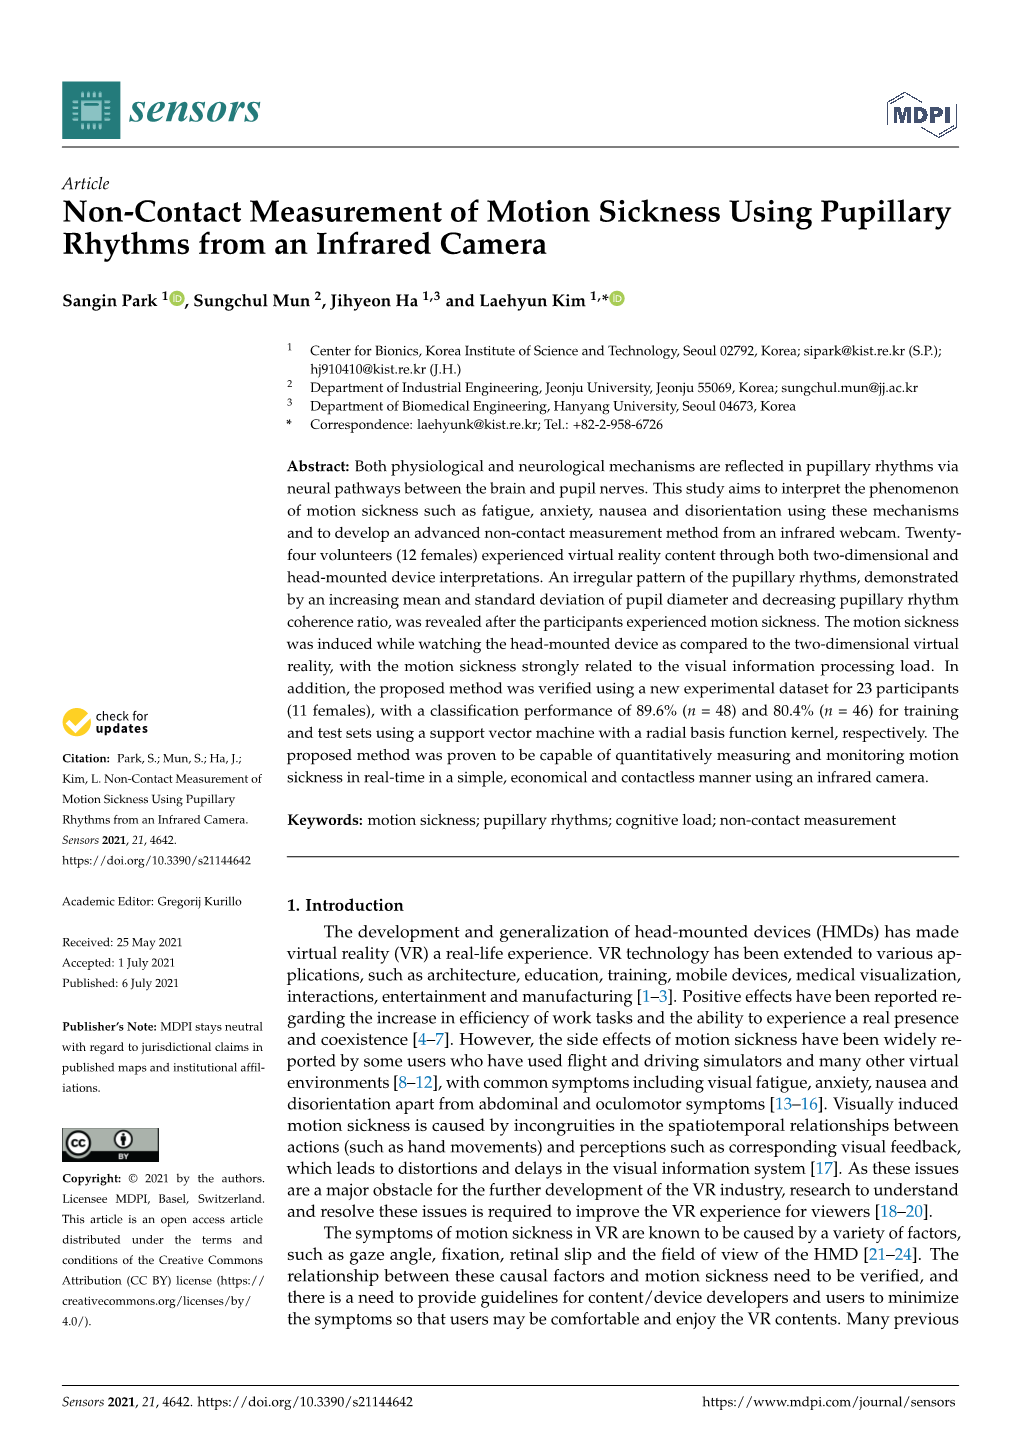 Non-Contact Measurement of Motion Sickness Using Pupillary Rhythms from an Infrared Camera